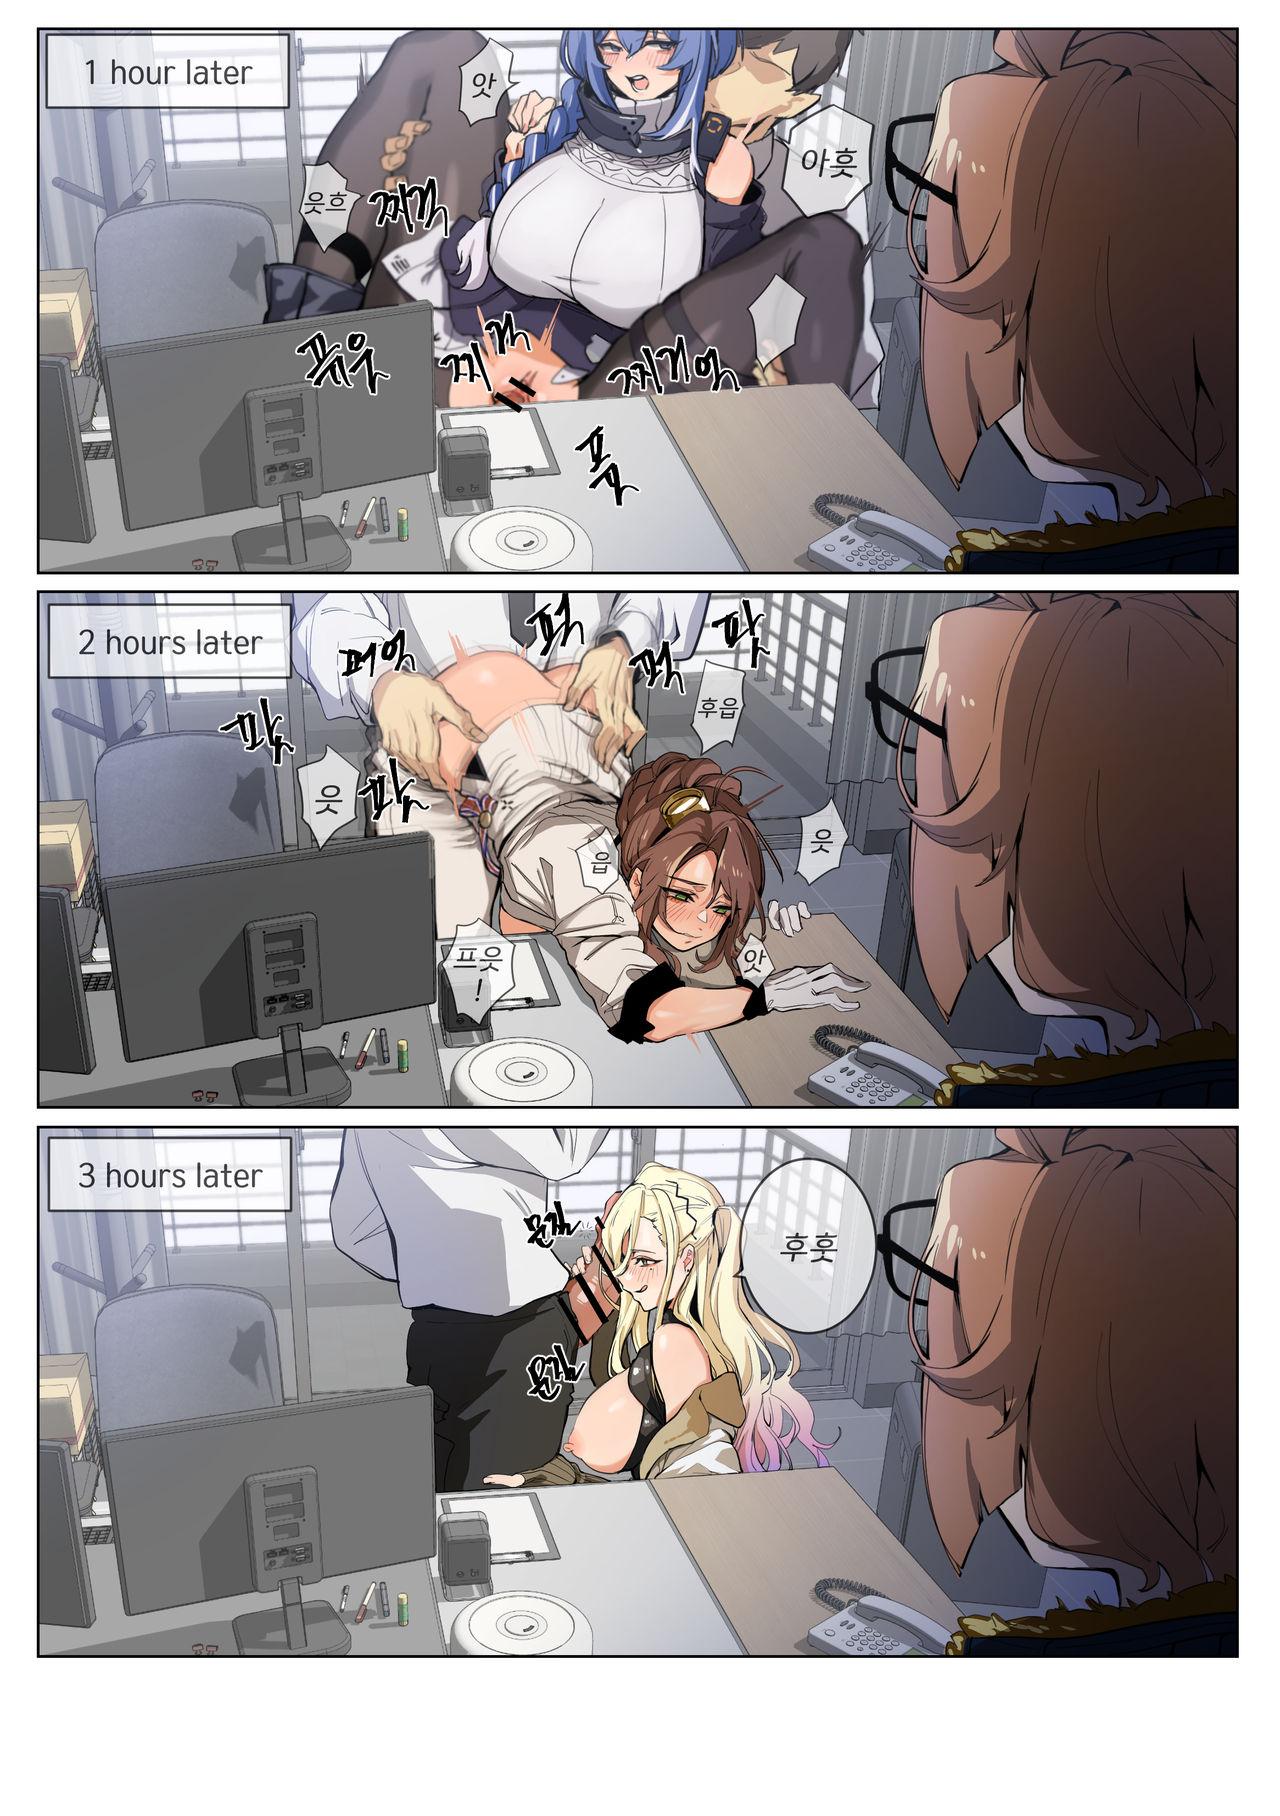 Stepsis Grizzly - Girls frontline Dirty - Page 4